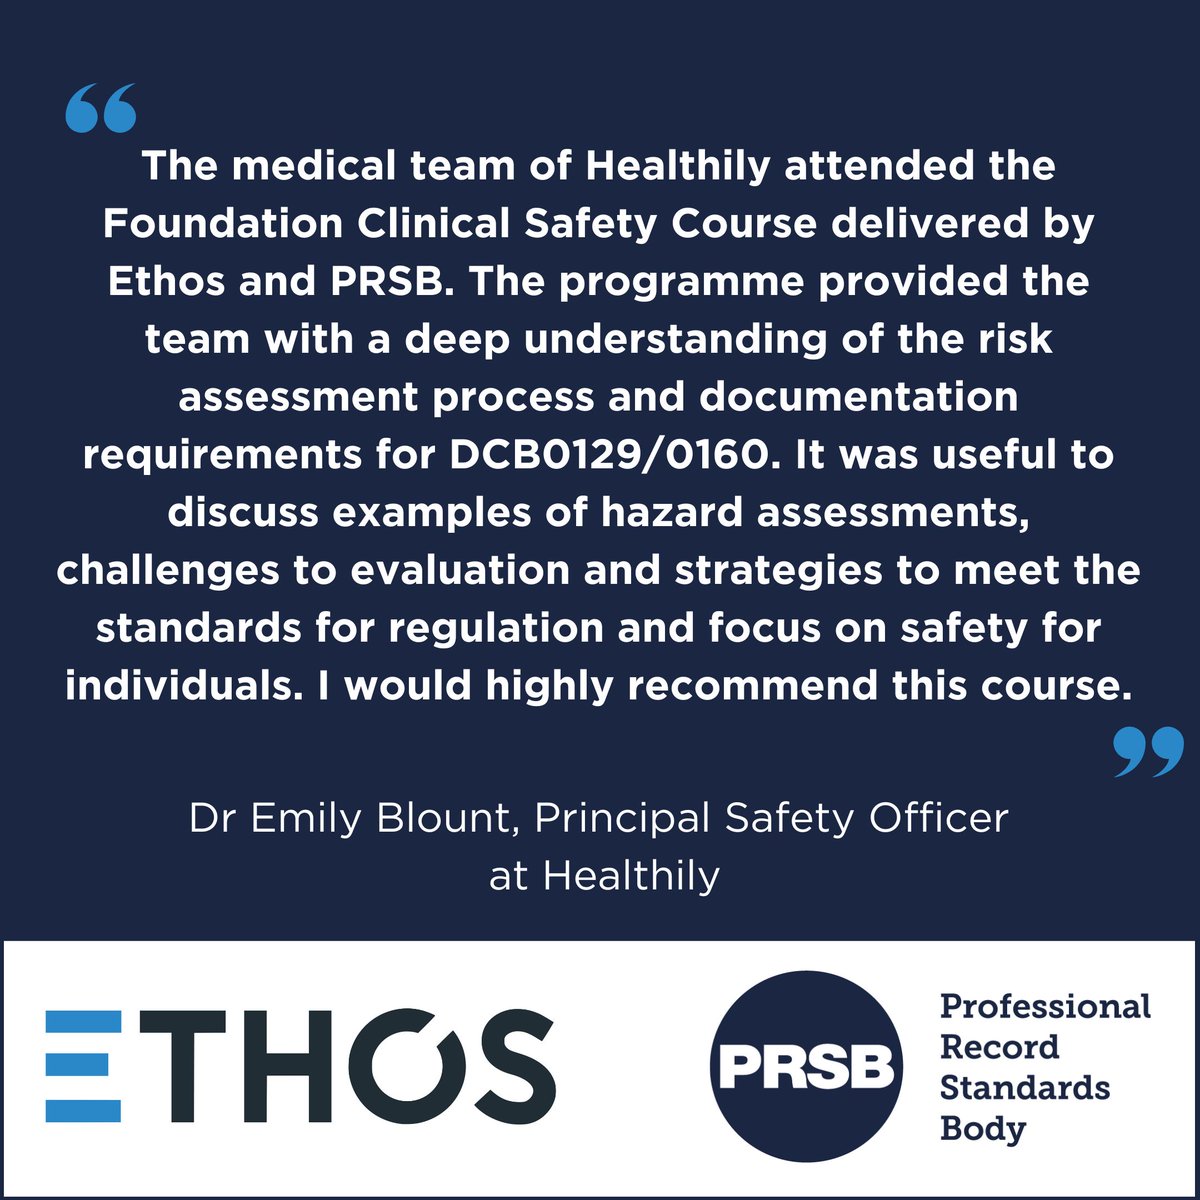 Don't just take our word for it... Our training with @LtdEthos will prepare the ground for your first #clinicalsafety officer role. Join our next training session on 14 May: hubz.li/Q02tzLVs0 @wearehealthily #clinicalsafety #cso #riskassessment #healthcare #socialcare